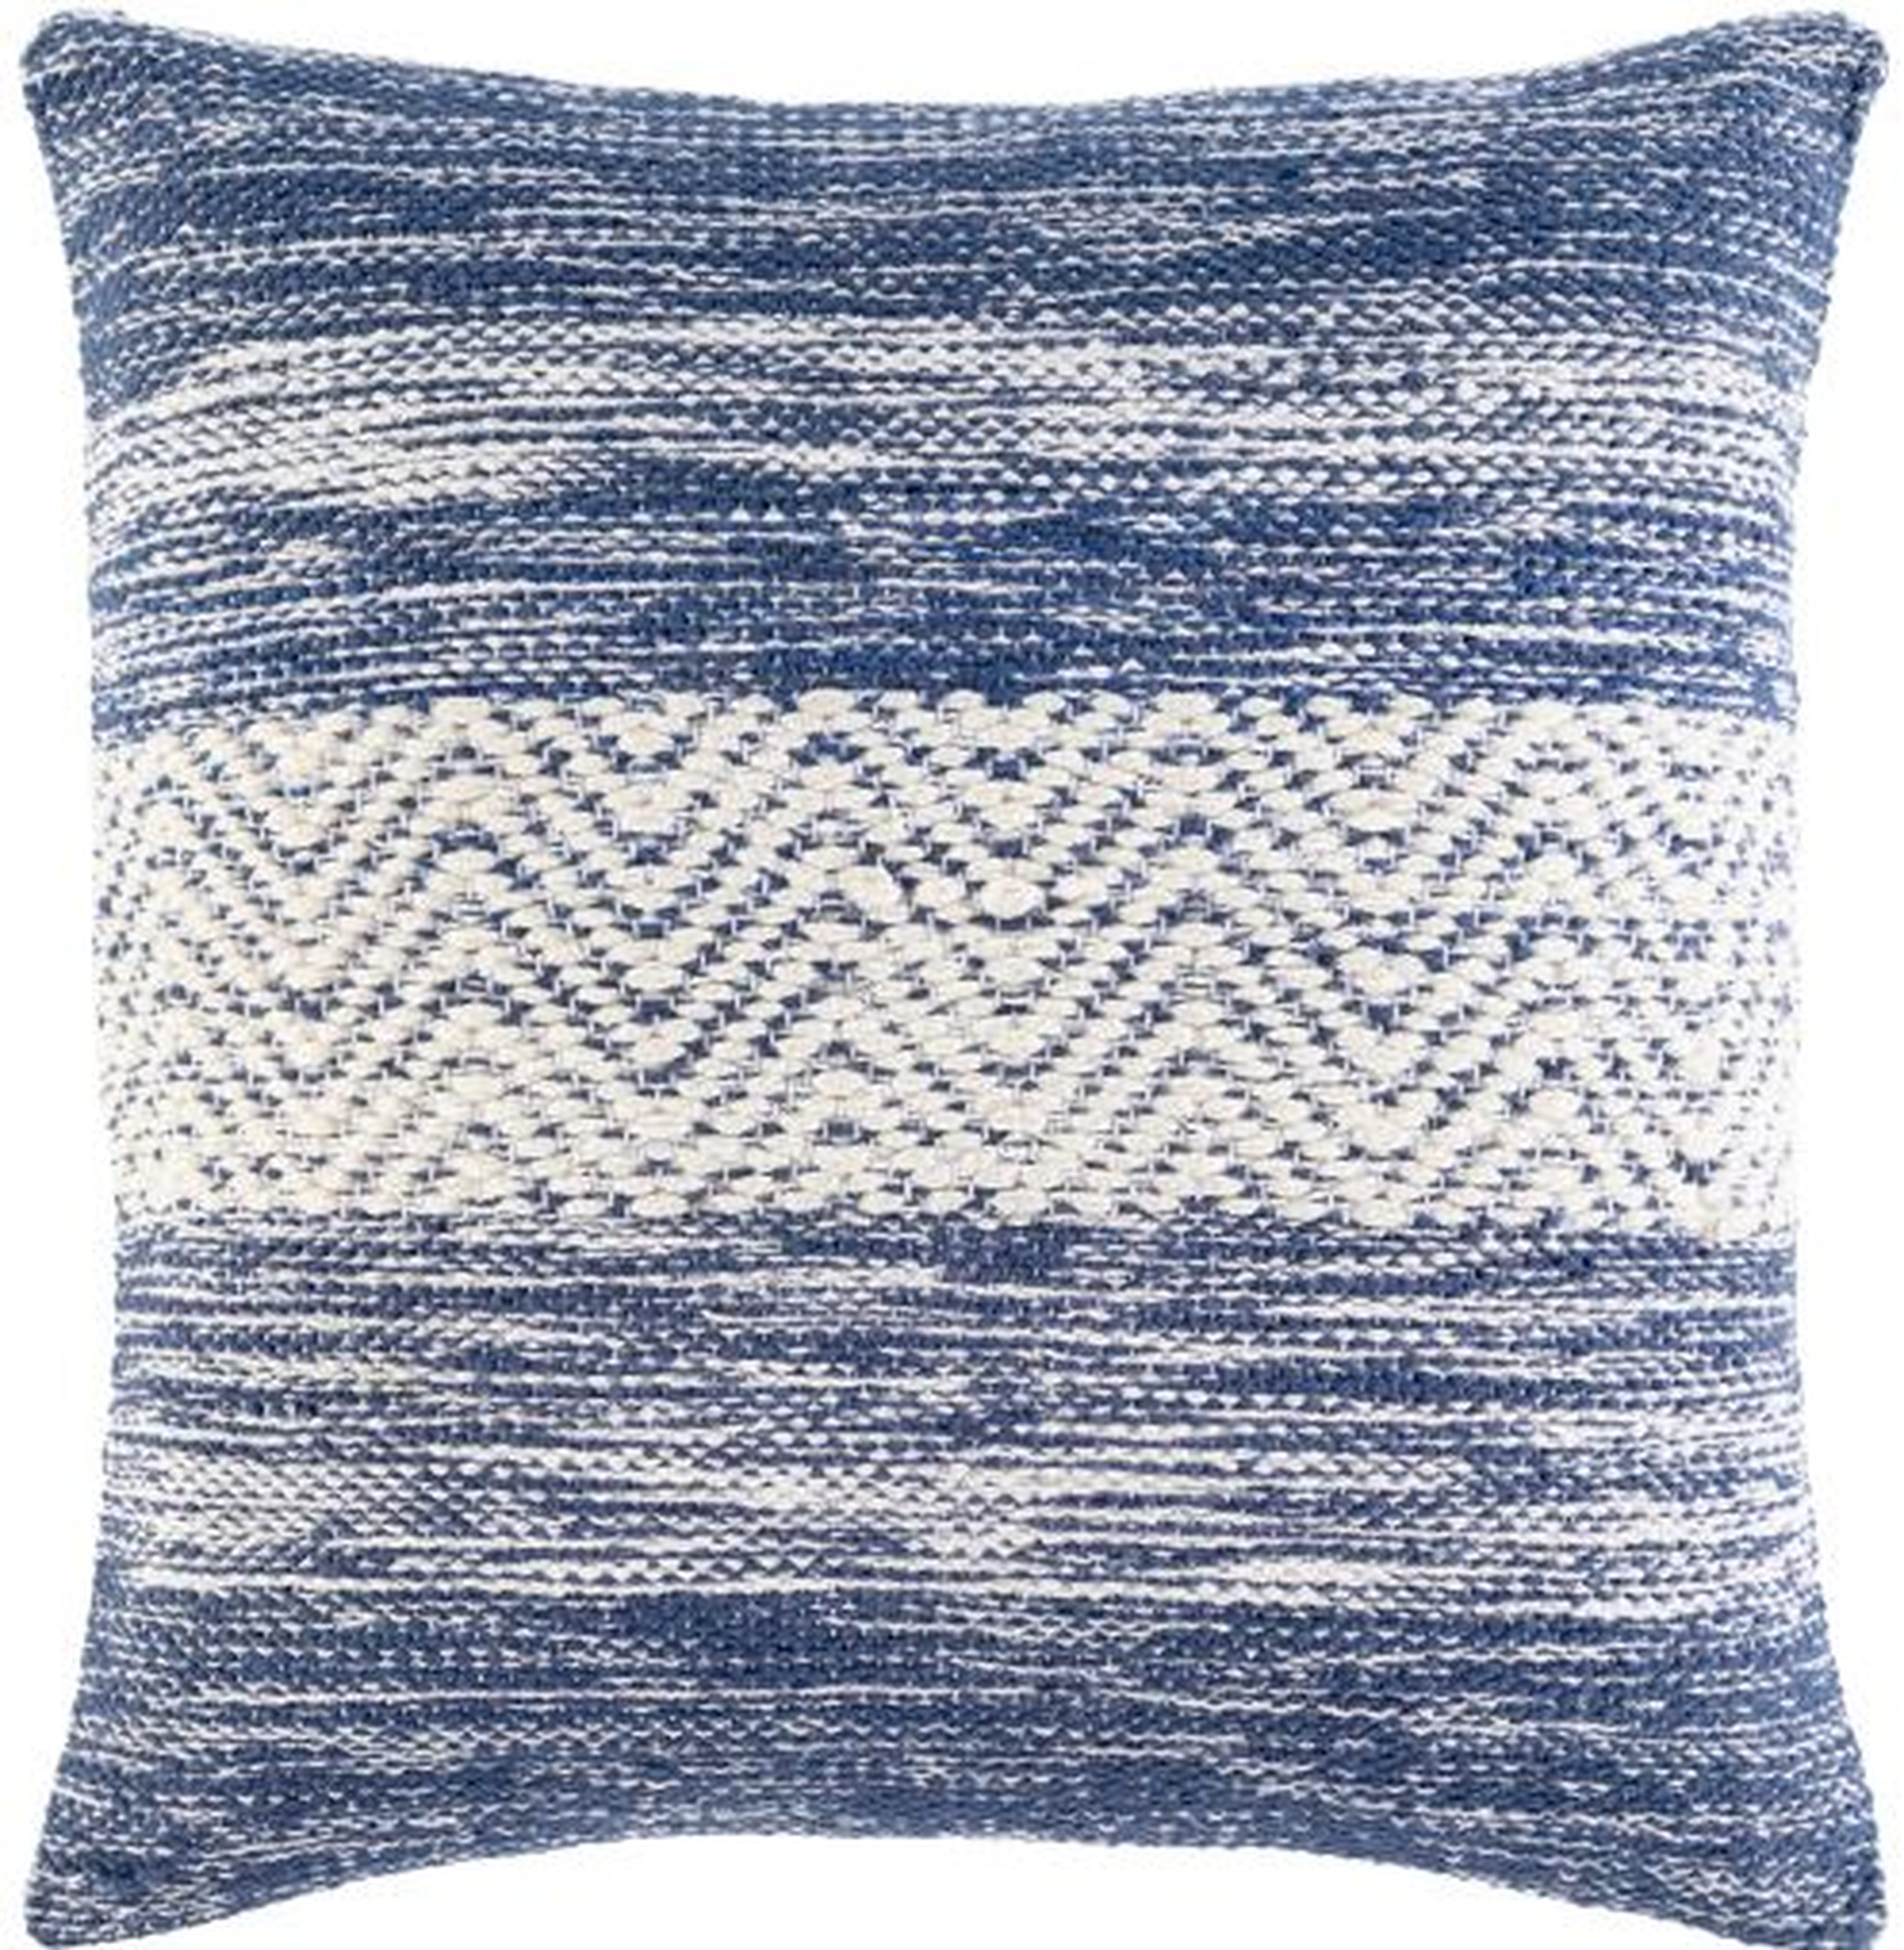 Levi IVL-002, 20" x 20" Pillow Shell with Polyester Insert - Surya